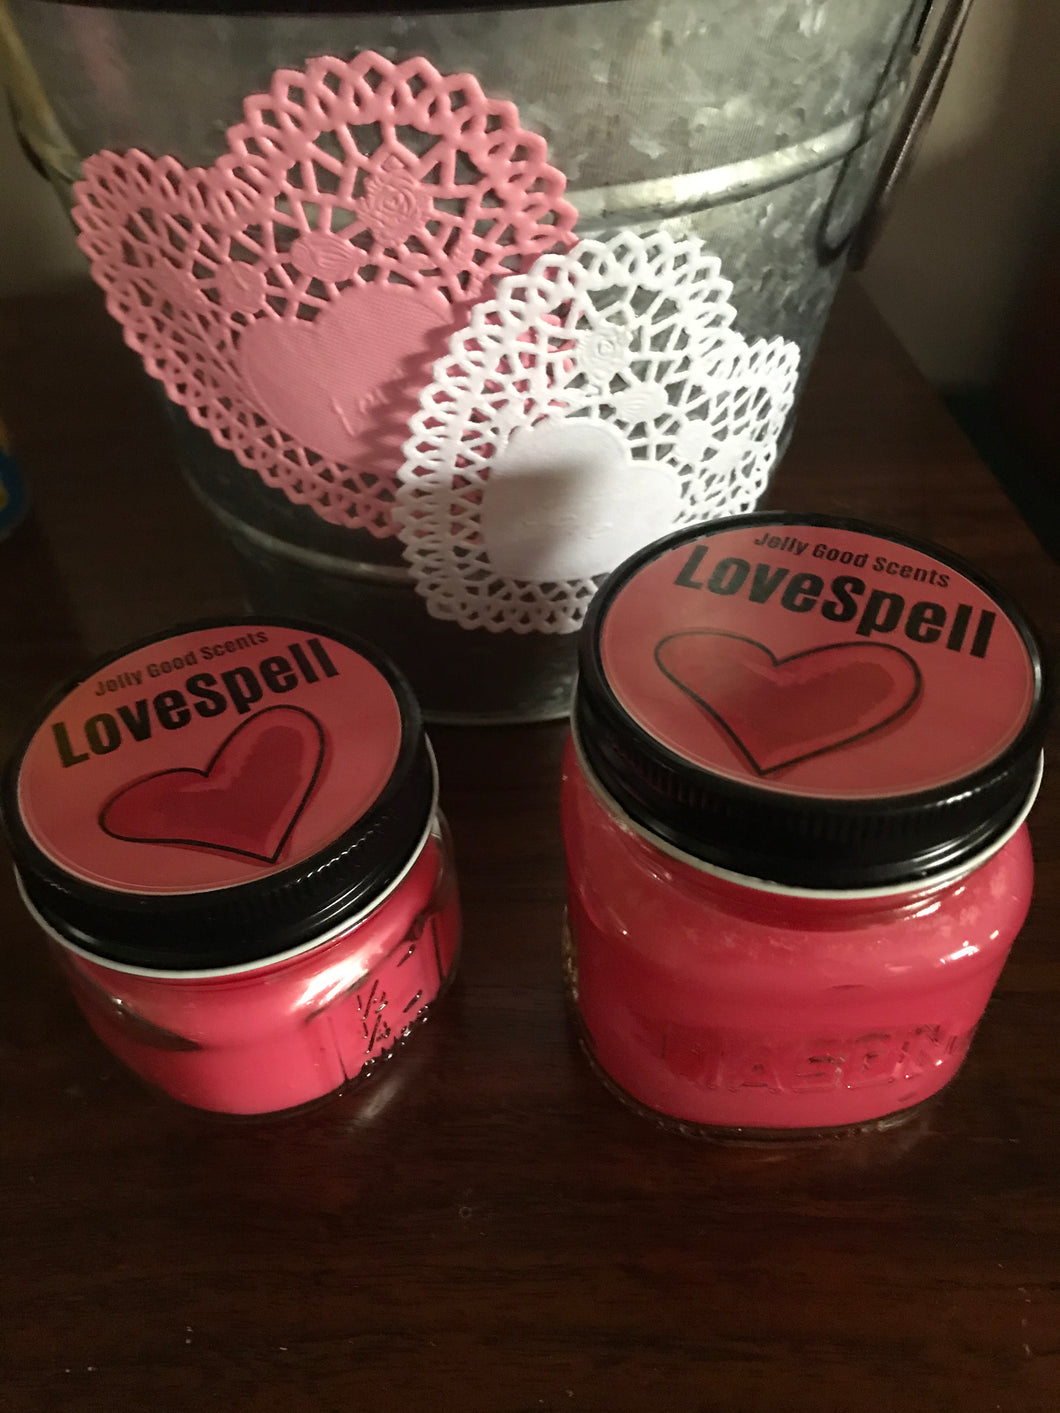 Love spell candles